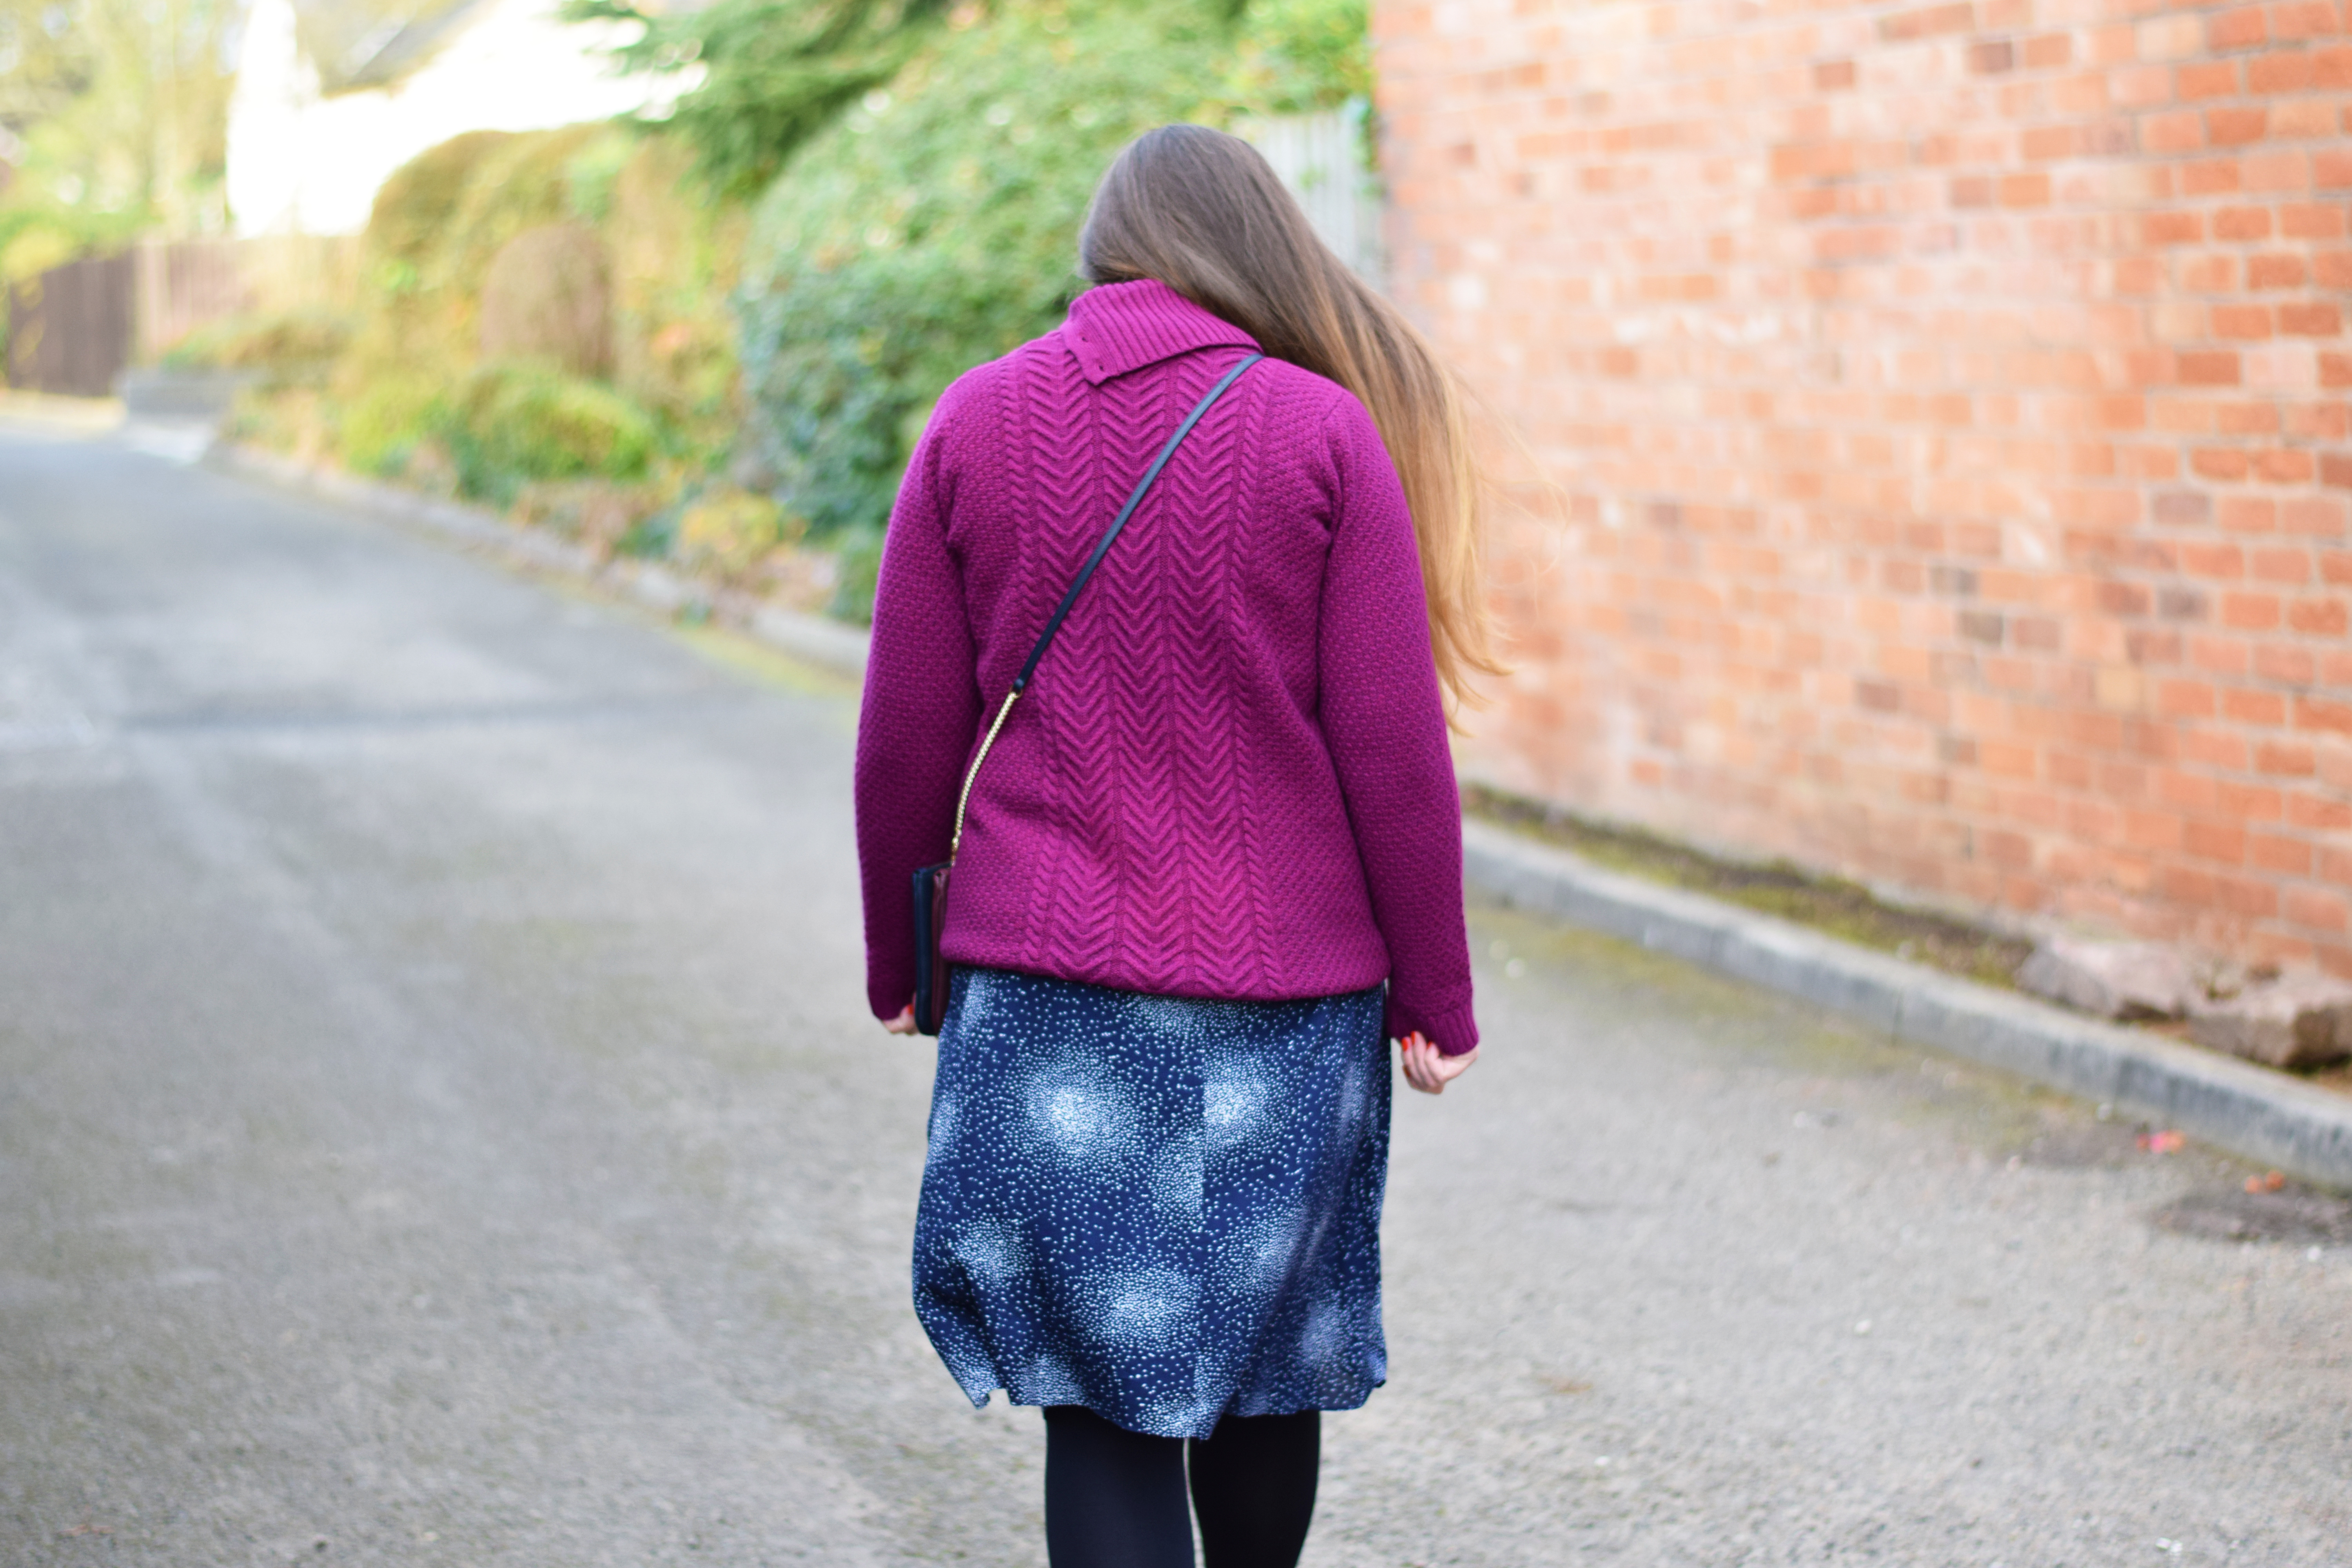 Purple chunky knit jumper with a navy and white skirt